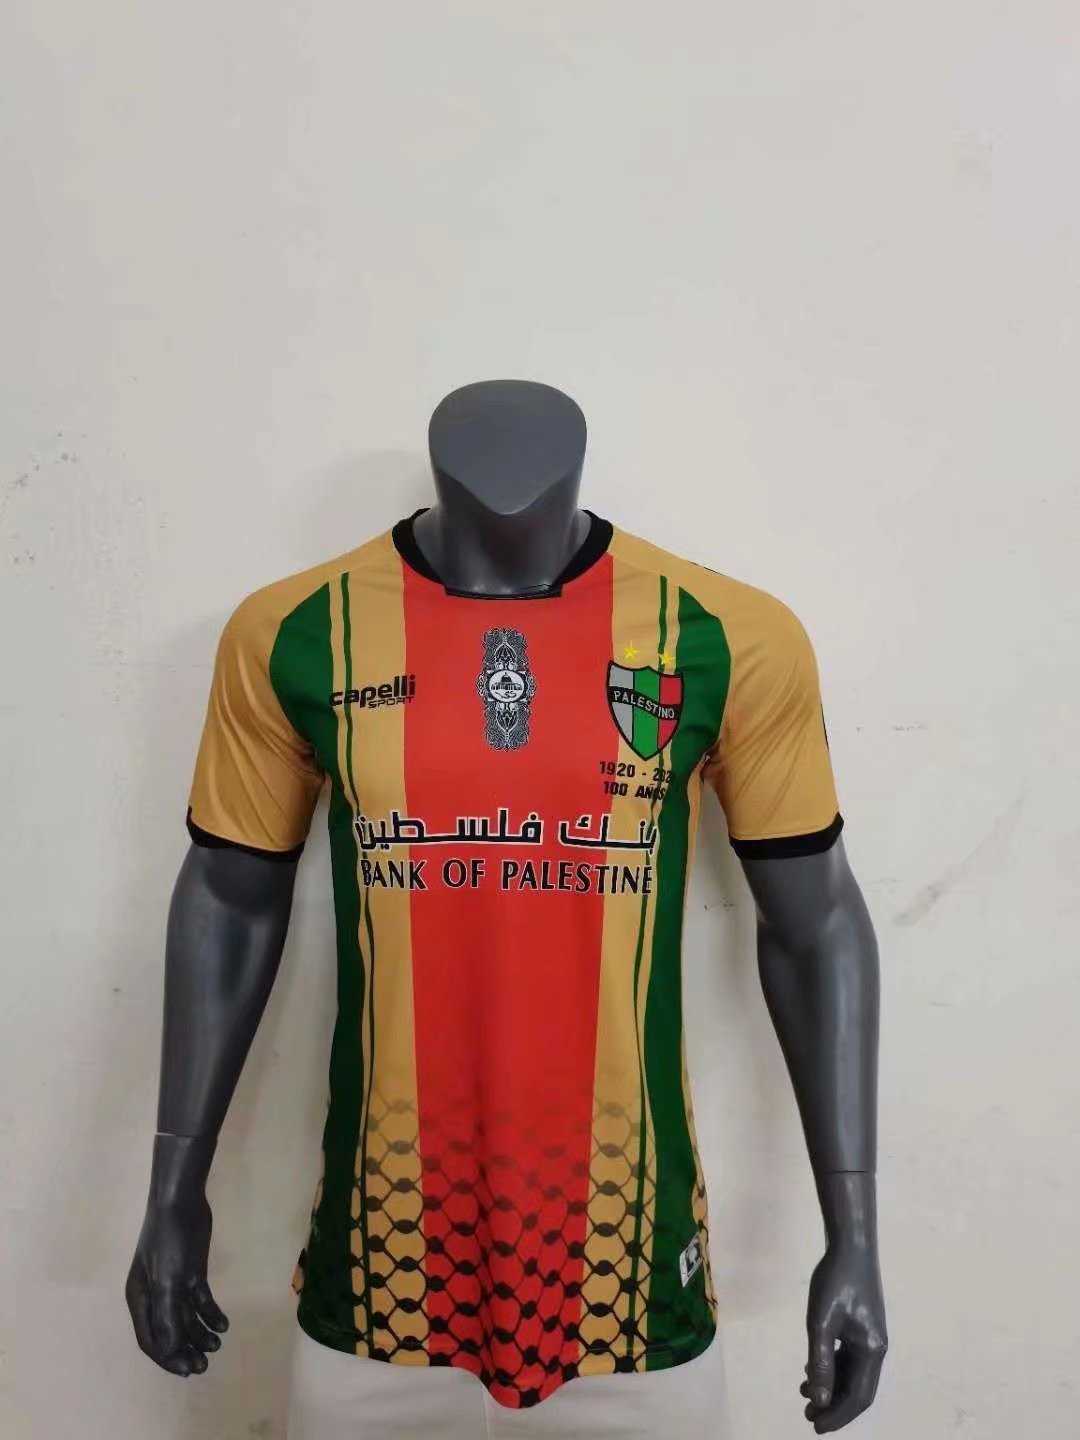 20/21 Palestino Deportivo Special Edition Jersey Men's - Click Image to Close